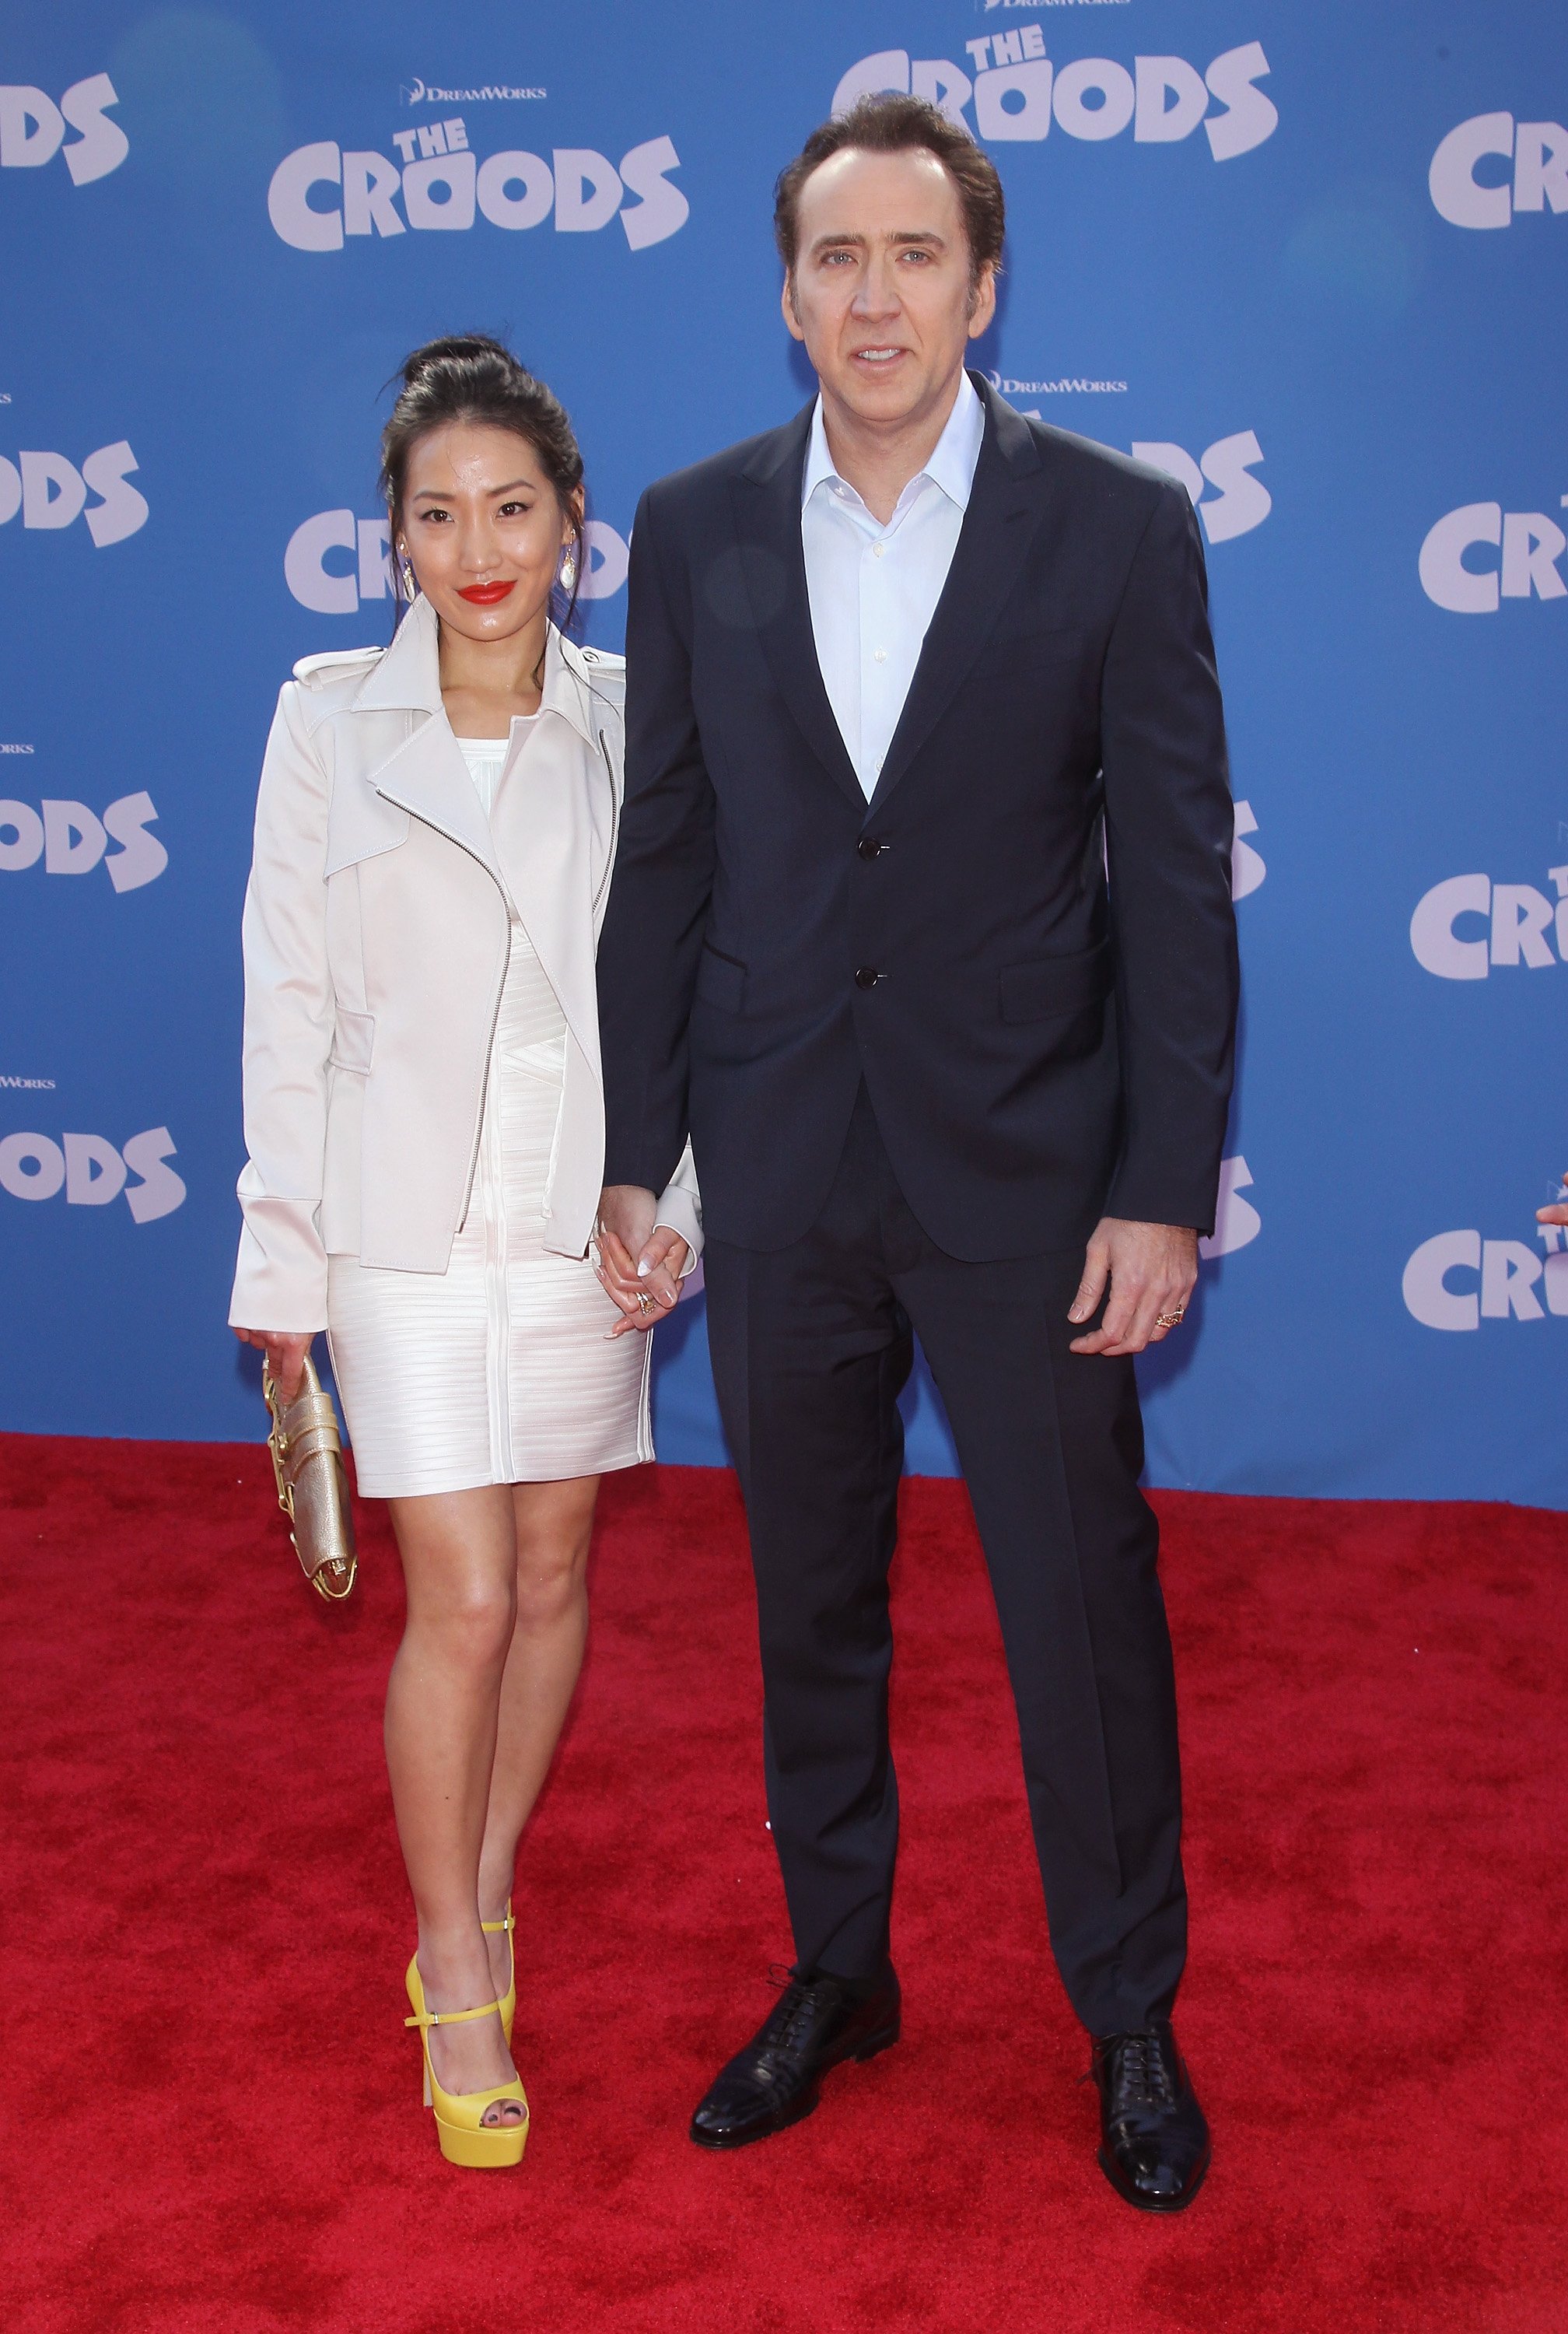 Alice Kim and Nicolas Cage at the premiere of "The Croods" in New York City on March 10, 2013 | Source: Getty Images 